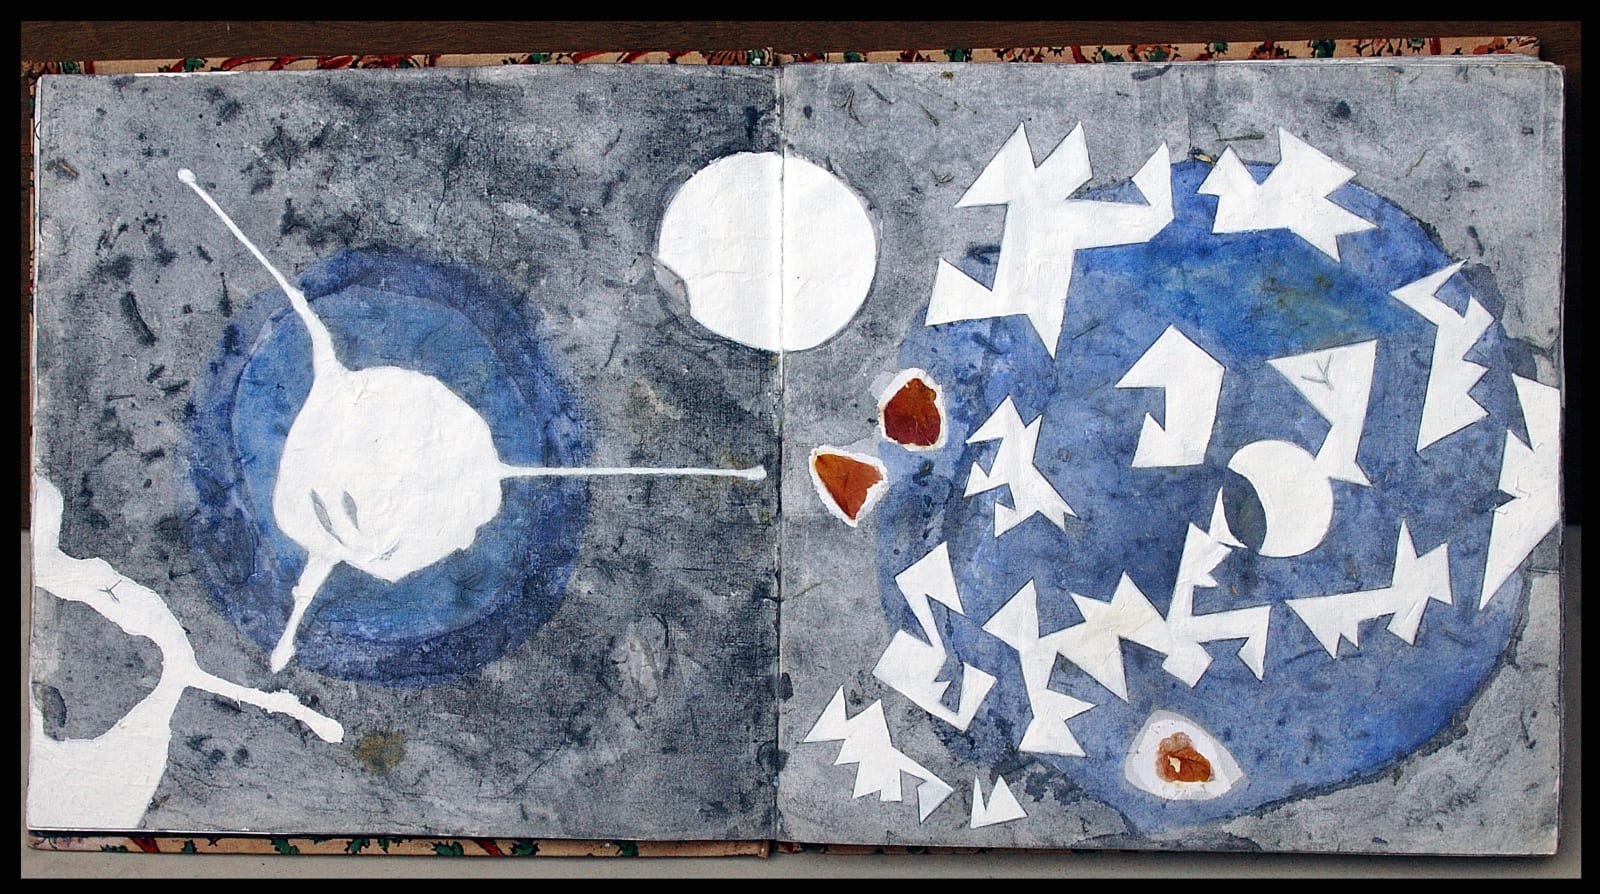 Saleem Arif Quadri (1949-) Geometry without Gravity 2008-12 Image from a Manuscript Book of over 100 pages Watercolour, gouache on paper with ingrained dry flowers, pen and ink 30.5 x 61 cm Image courtesy the artist © Saleem Quadri